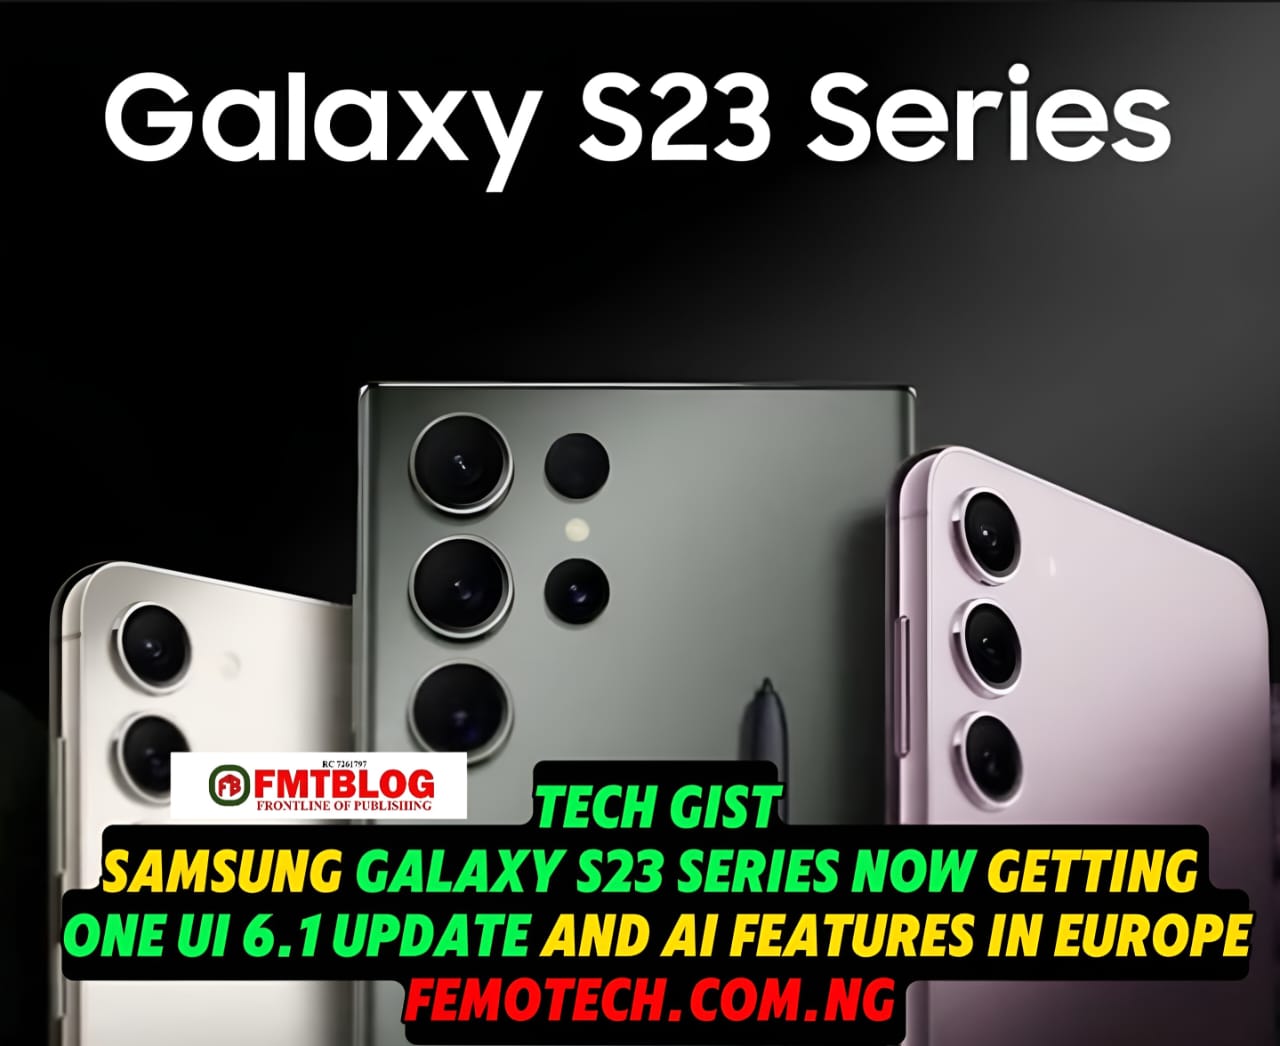 Samsung Galaxy S23 Series Now Getting ONE UI 6.1 Update, AI Features In Europe